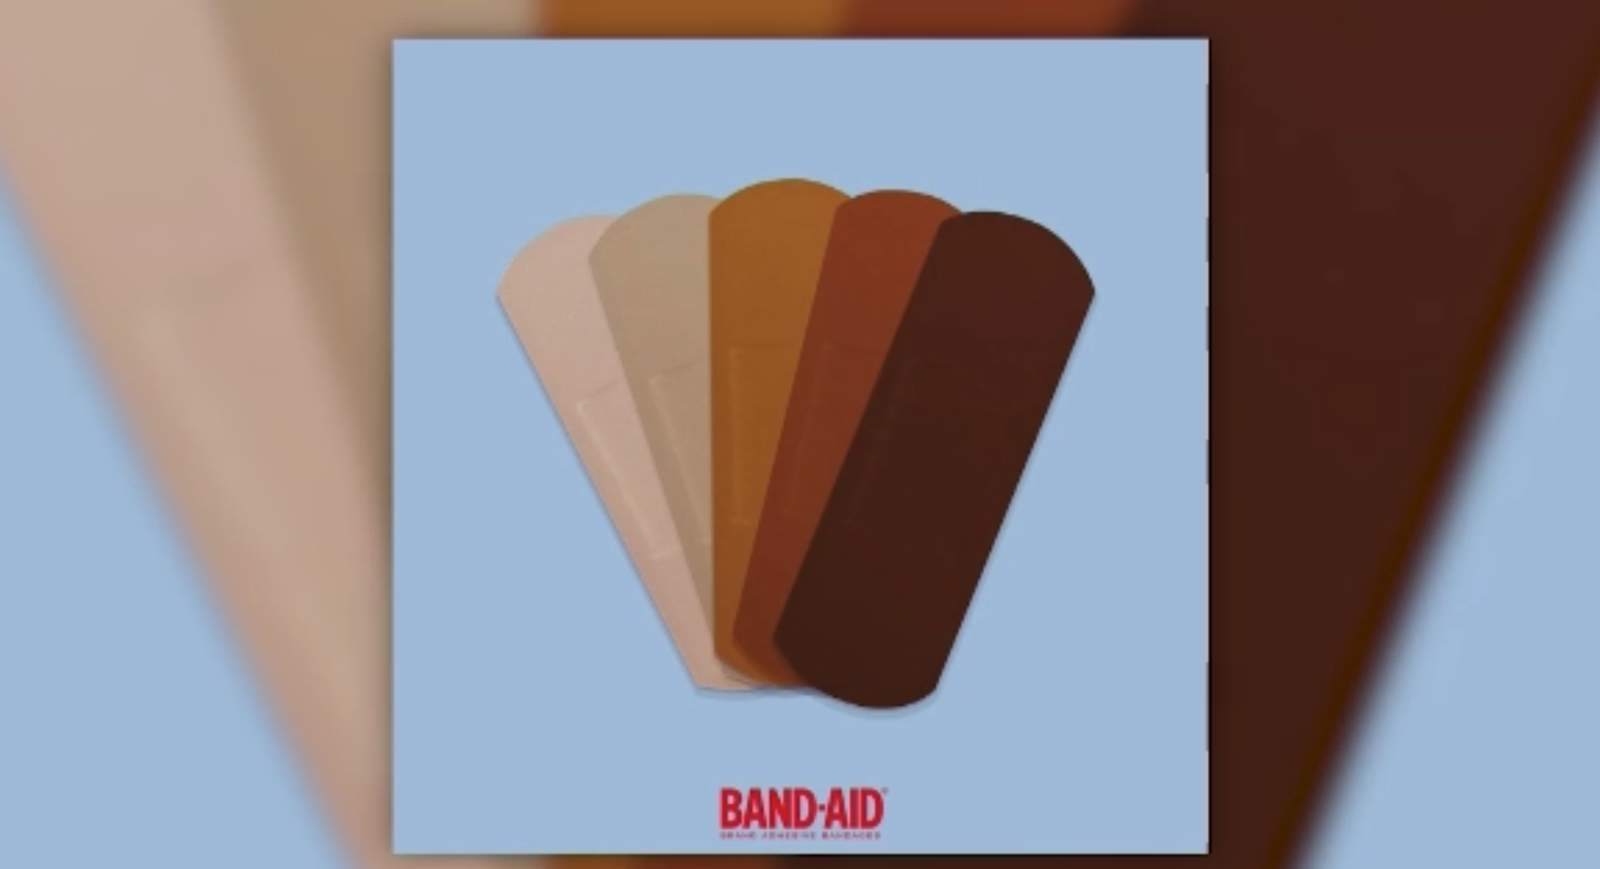 Band-Aid will make black and brown flesh-toned bandages